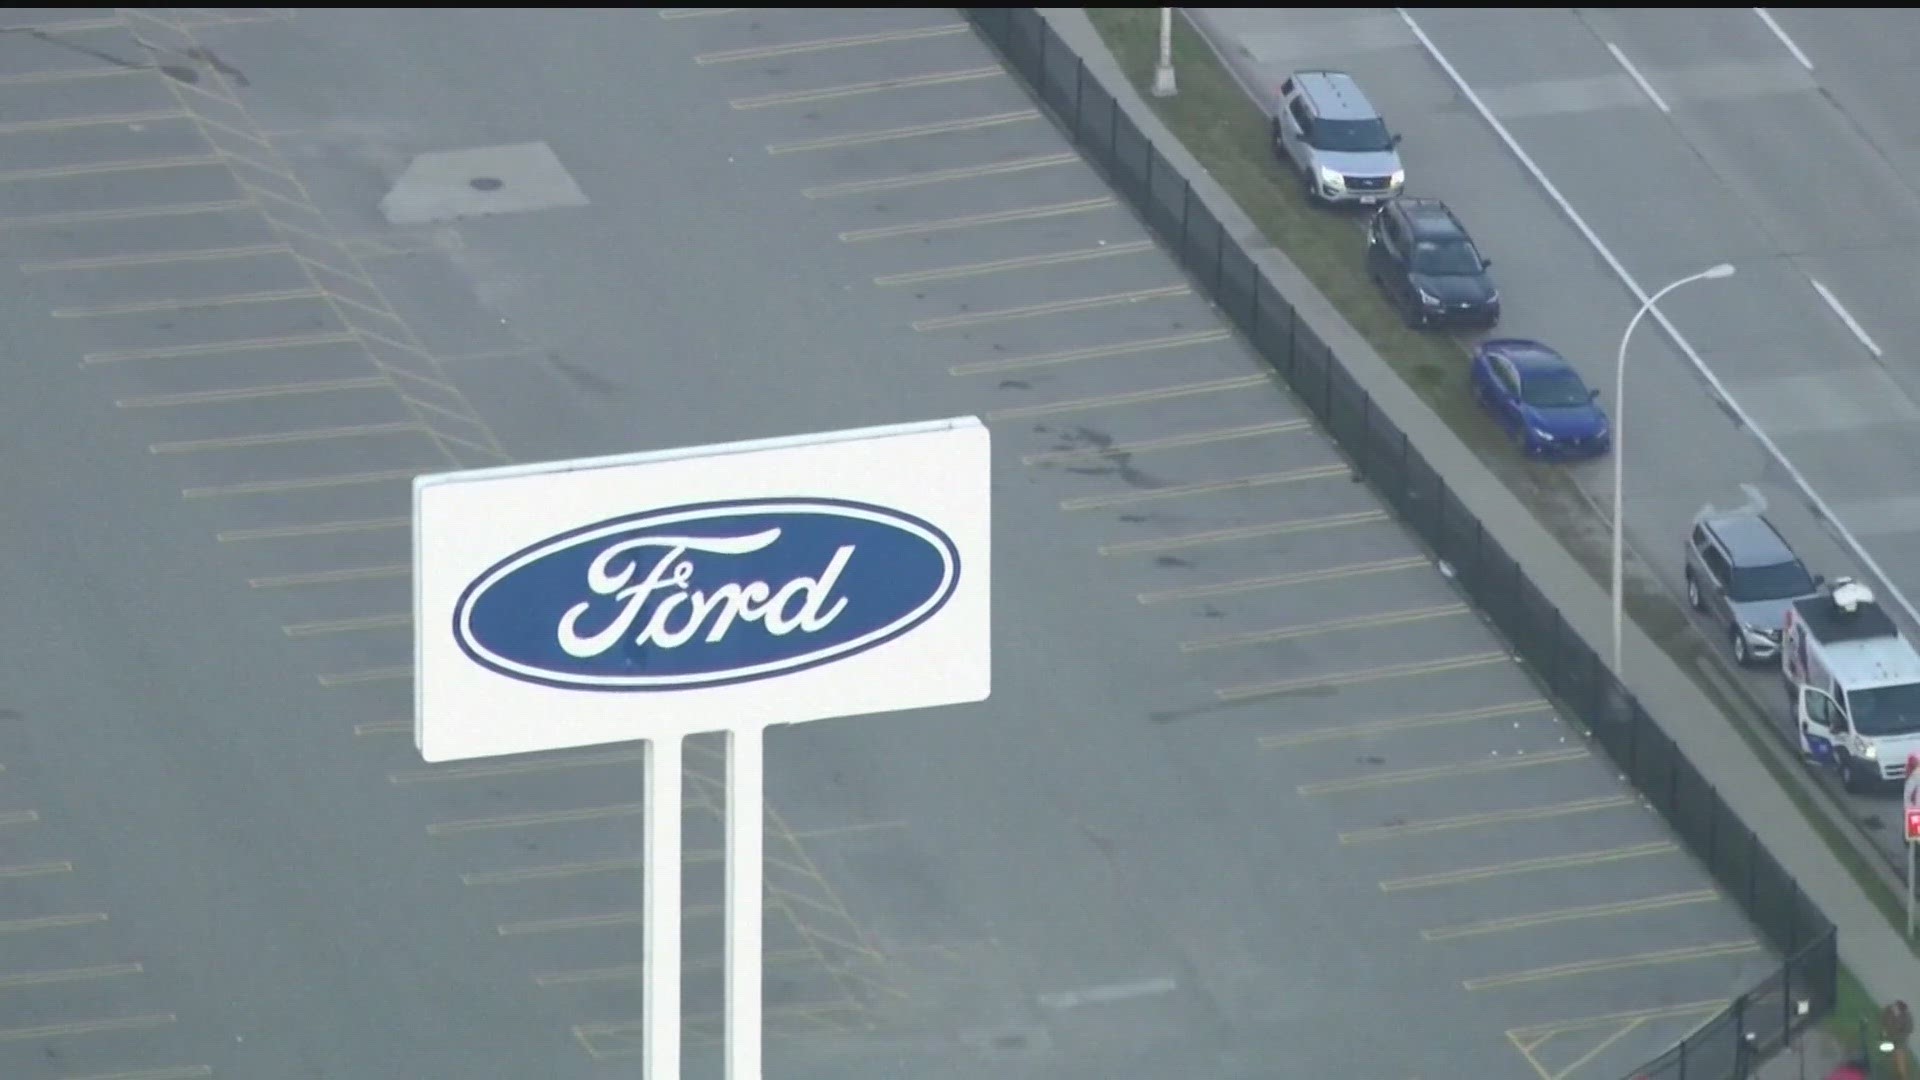 Under the proposed agreement, Ford workers would get 25% cost of living wage increases.